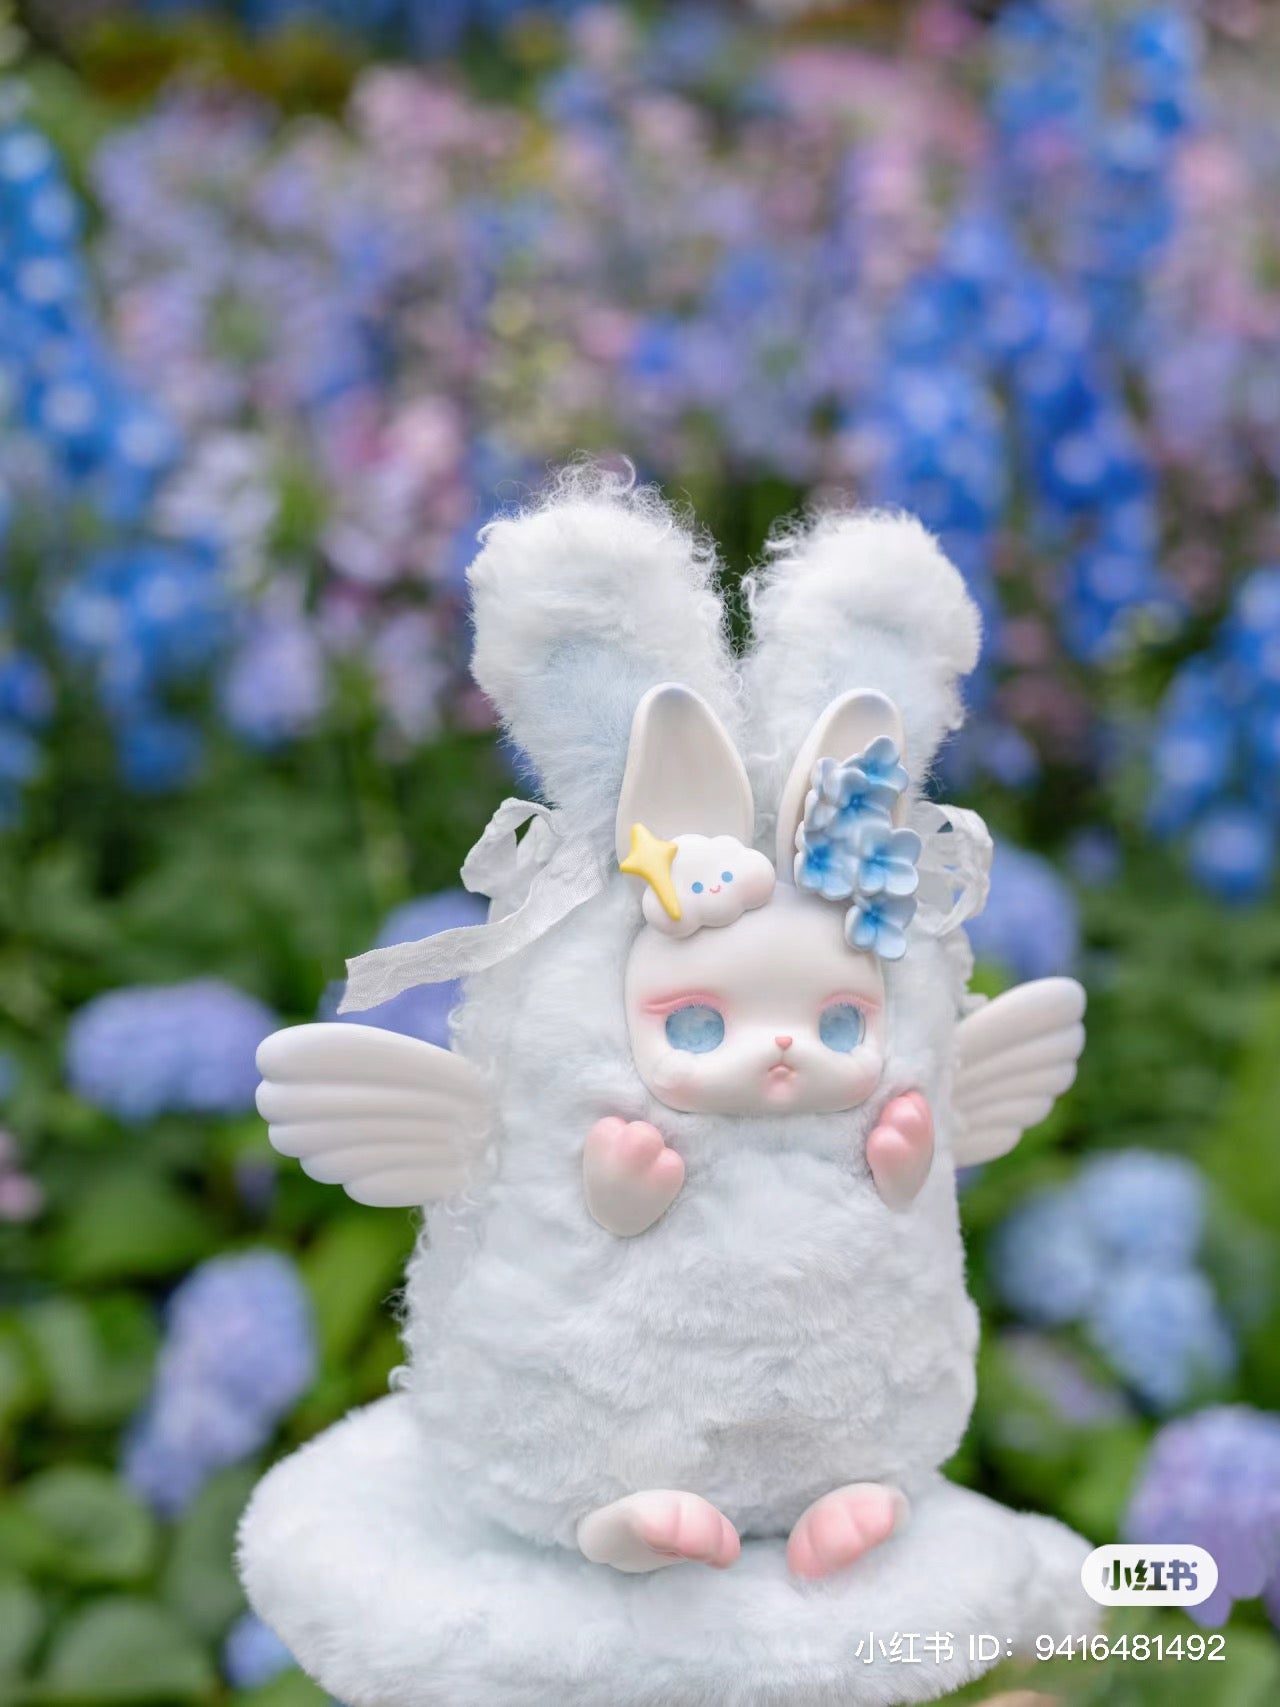 A white stuffed animal with bunny features and wings, part of the Loloan- Confession Language Blind Box Series at Strangecat Toys.